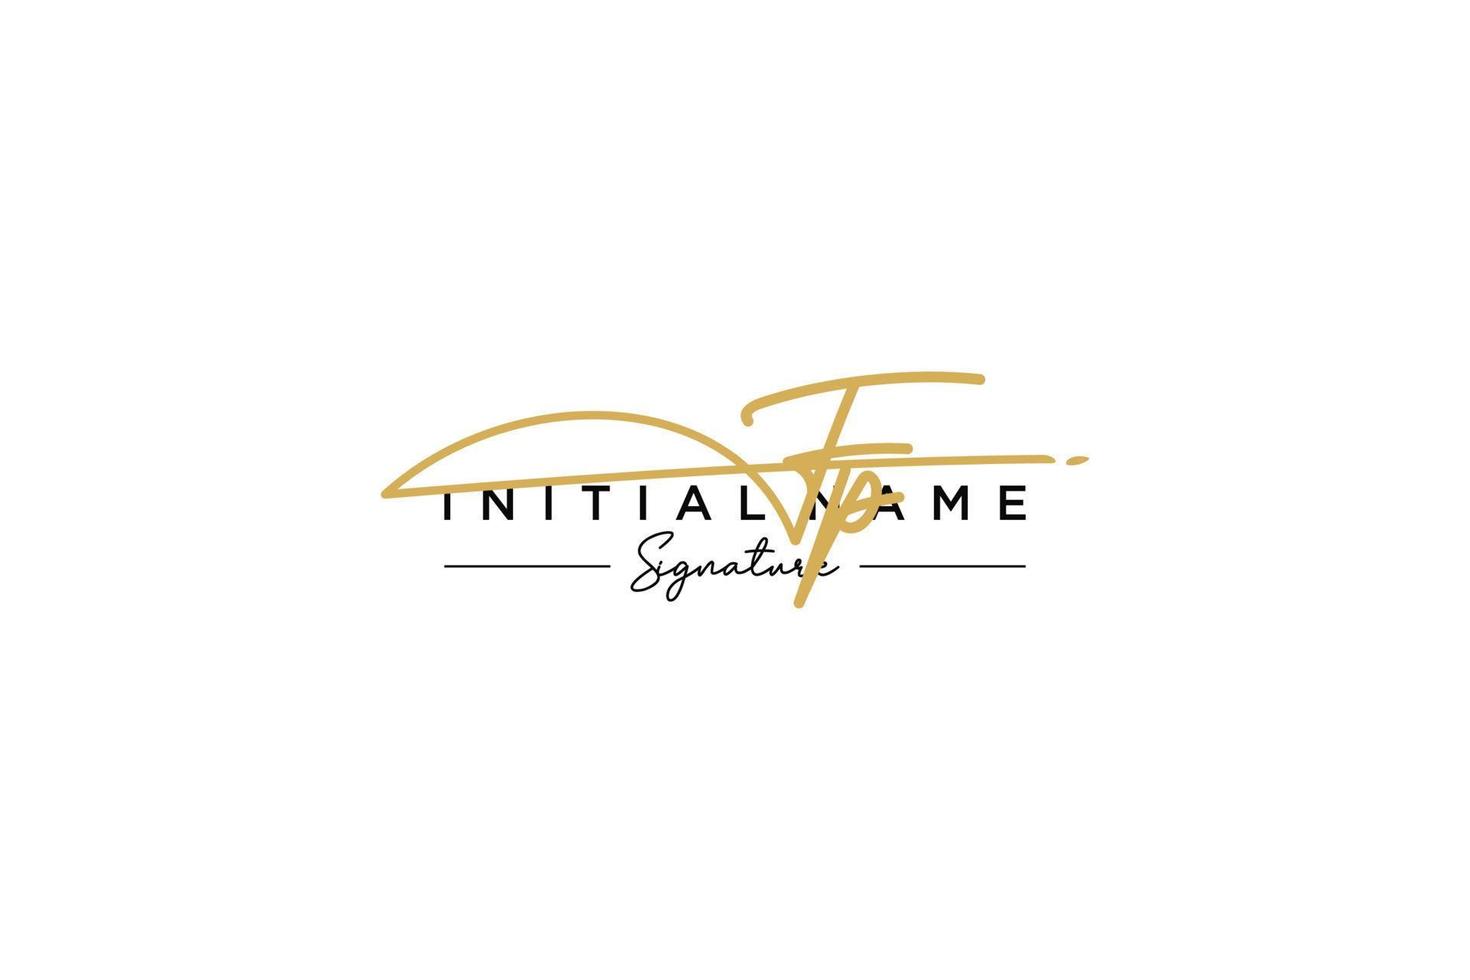 Initial FP signature logo template vector. Hand drawn Calligraphy lettering Vector illustration.